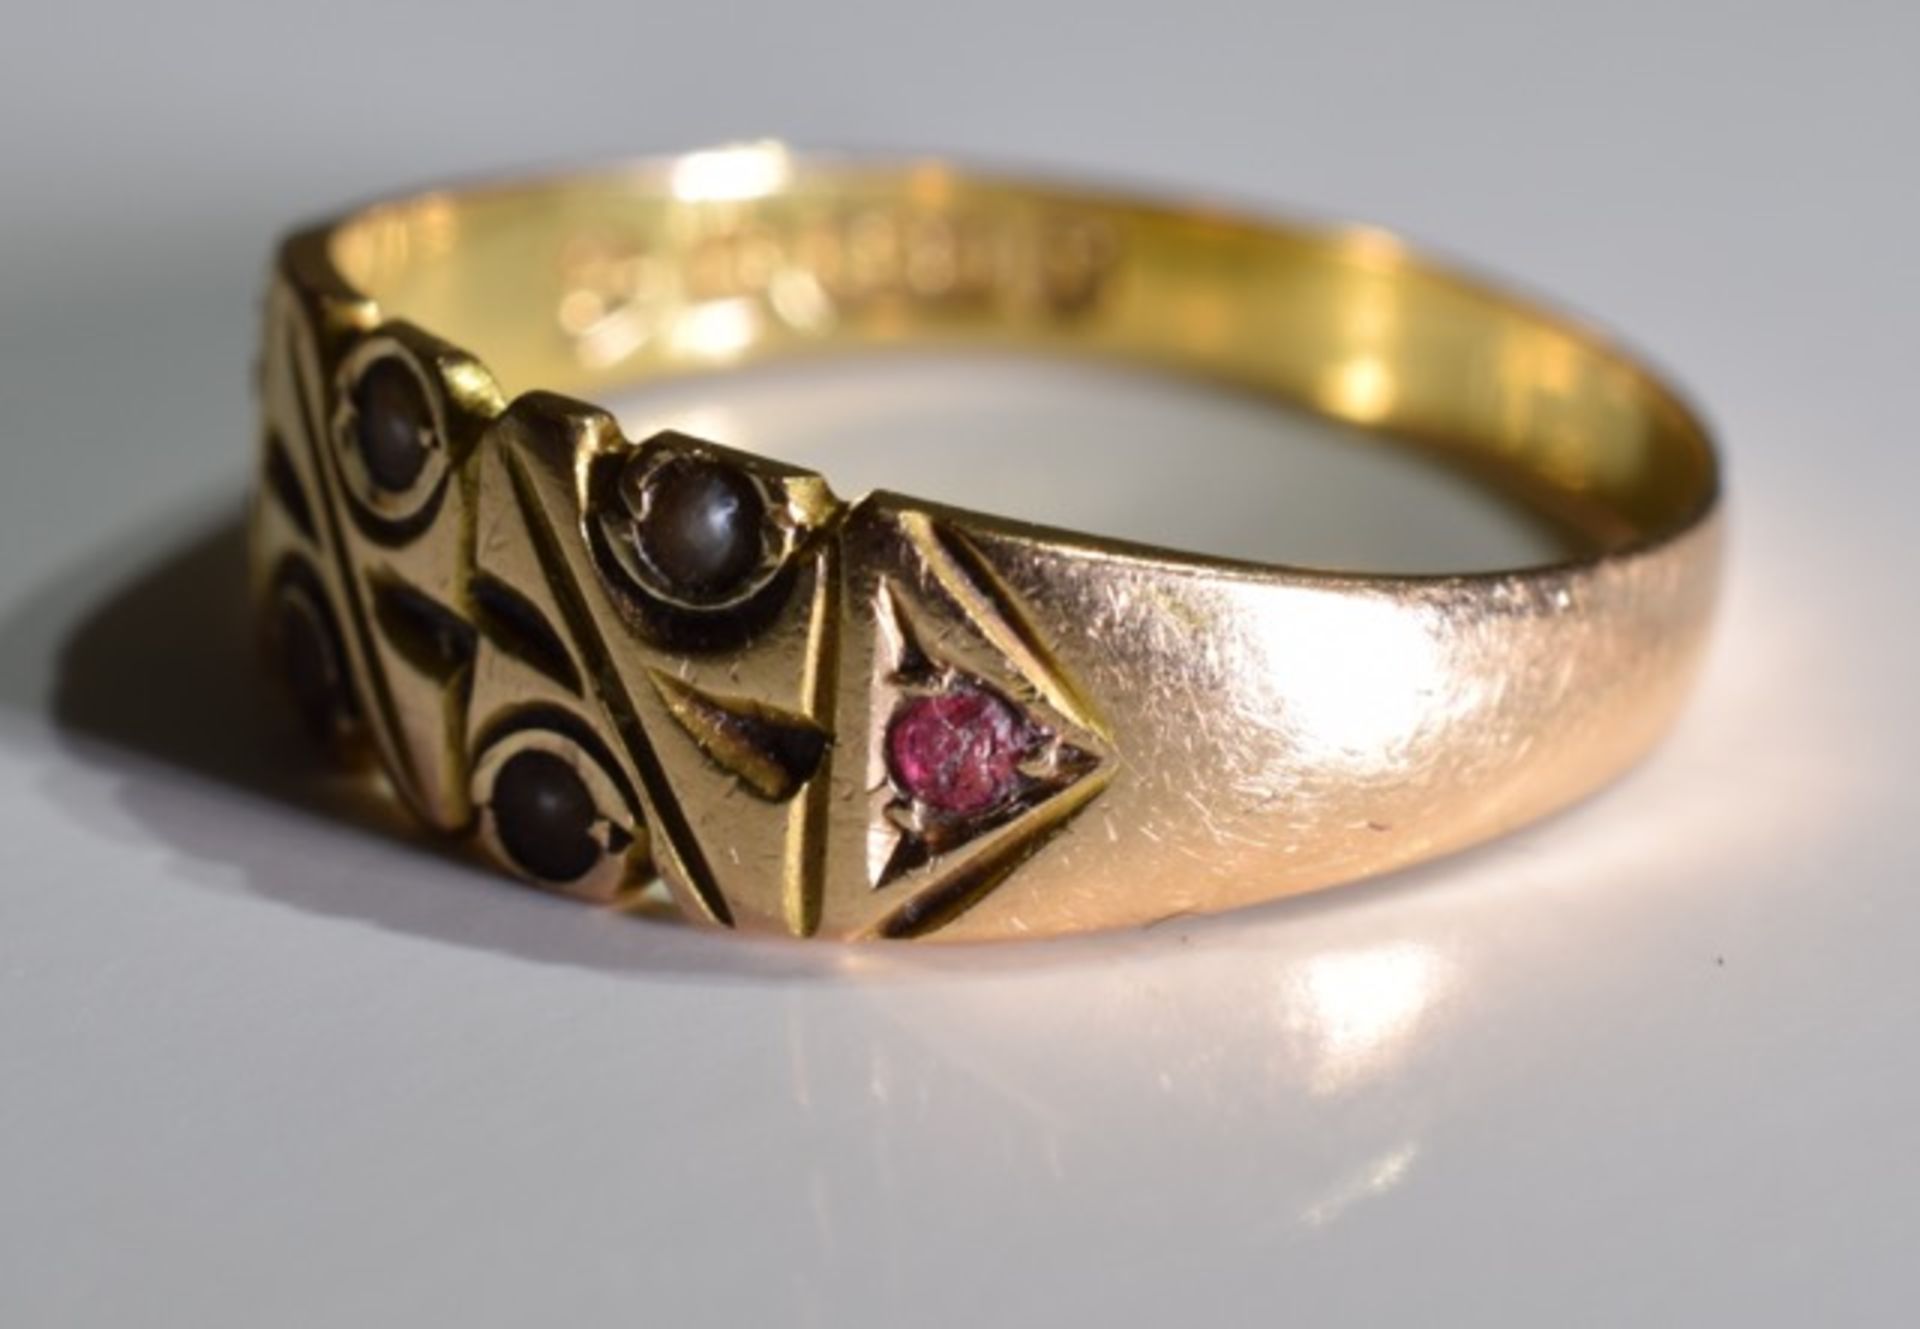 A 15ct gold old victorian gem set ring. 2.0 grms - size I. - Image 3 of 3